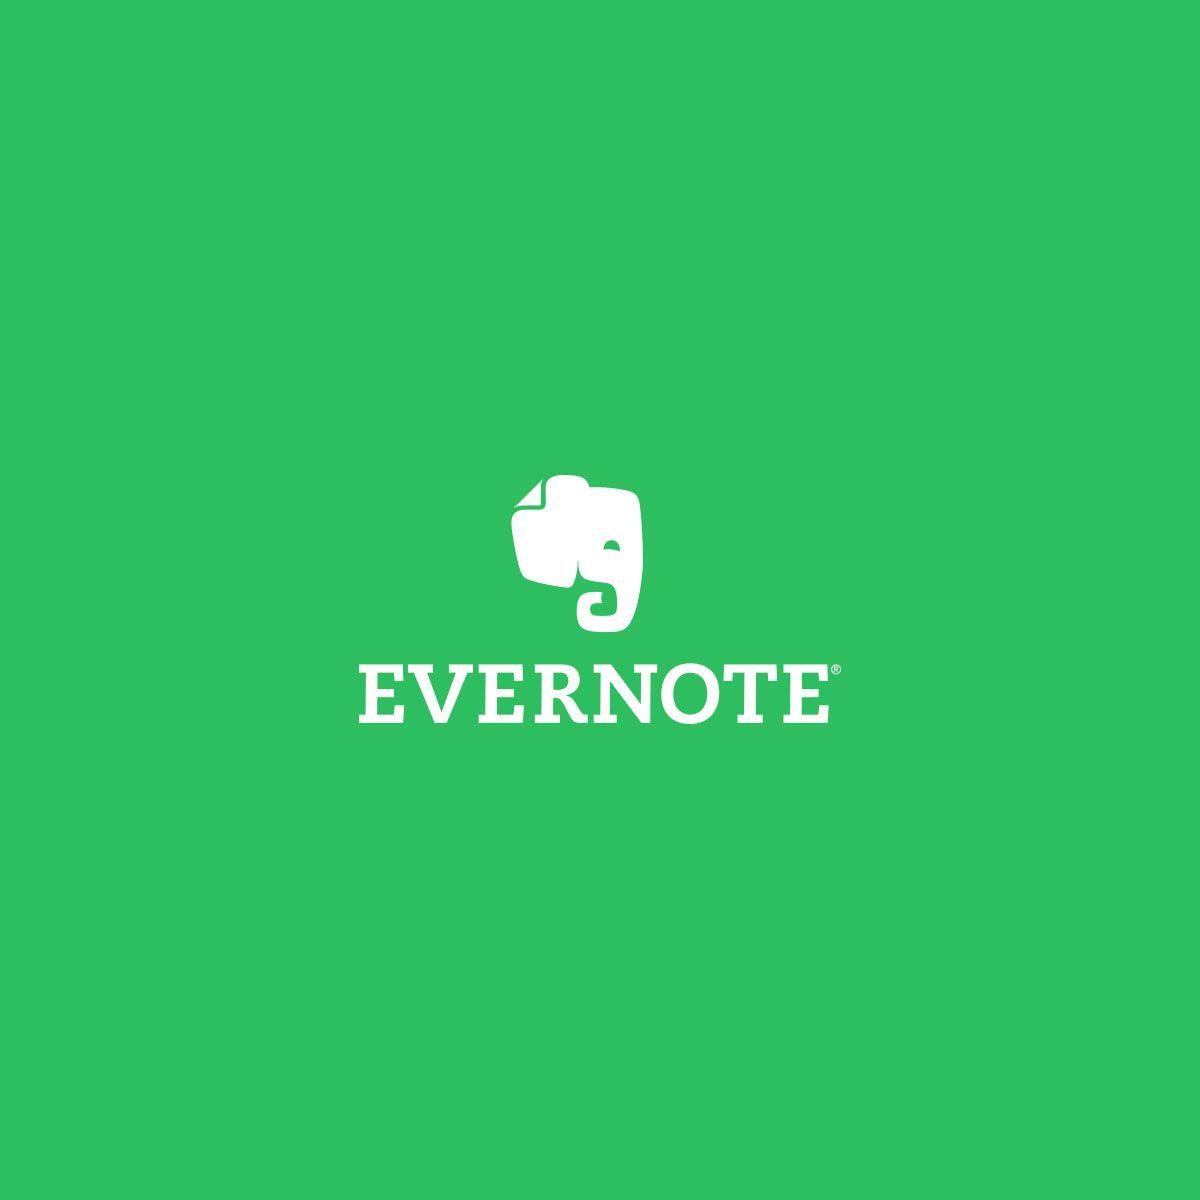 Evernote Logo - Productivity Hack is Evernote and Do I Need It?